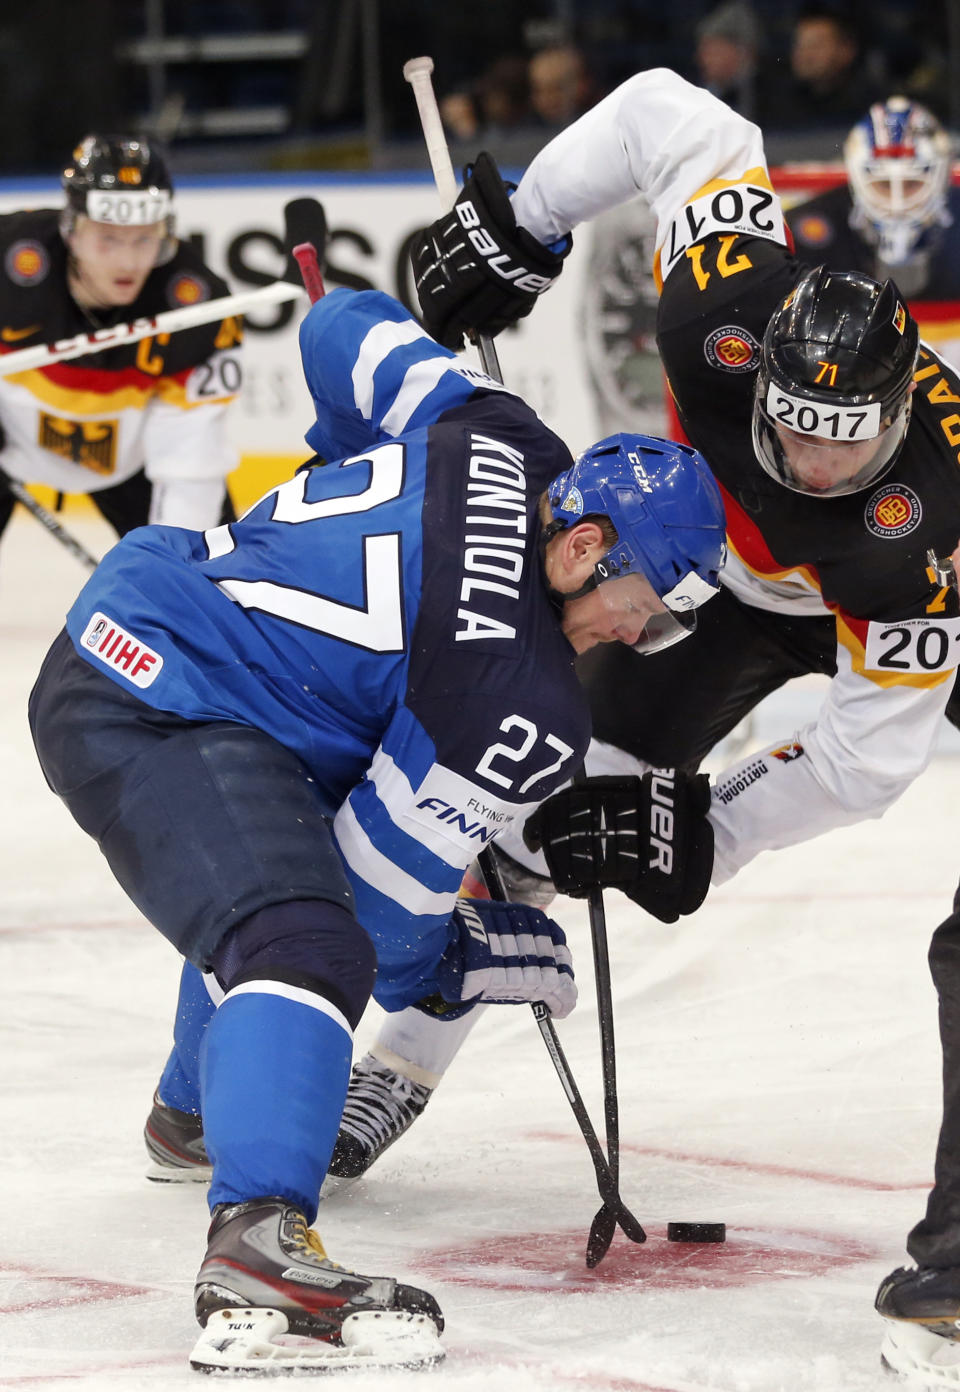 Finland forward Petri Kontiola, left, battles for the puck with Germany forward Leon Draisaitl during the Group B preliminary round match between Germany and Finland at the Ice Hockey World Championship in Minsk, Belarus, Tuesday, May 13, 2014. (AP Photo/Darko Bandic)